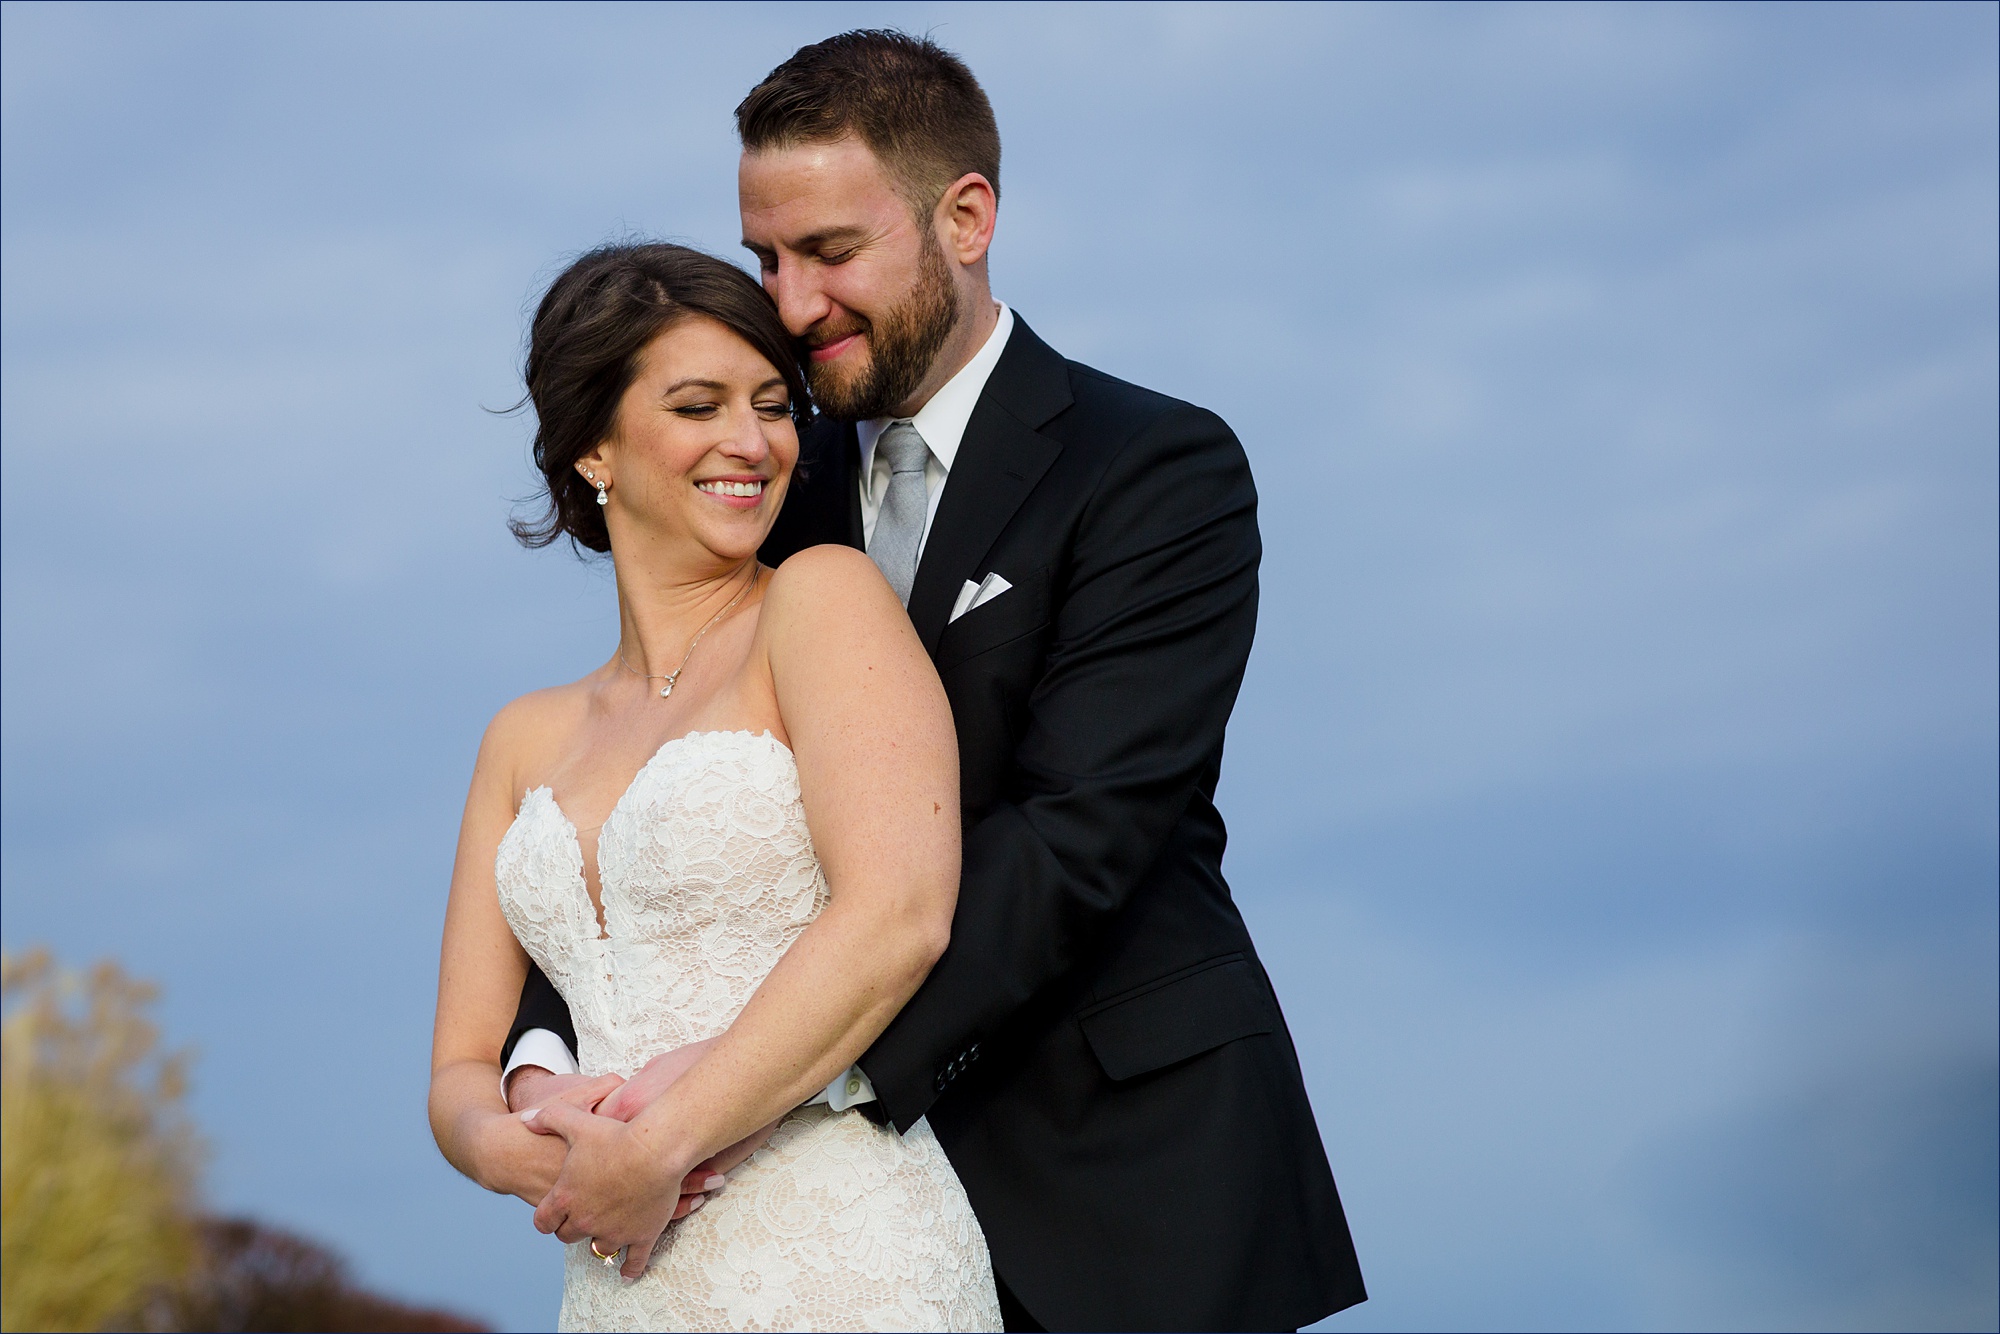 Beautiful Maine wedding day with the couple pictured against the stormy blue sky